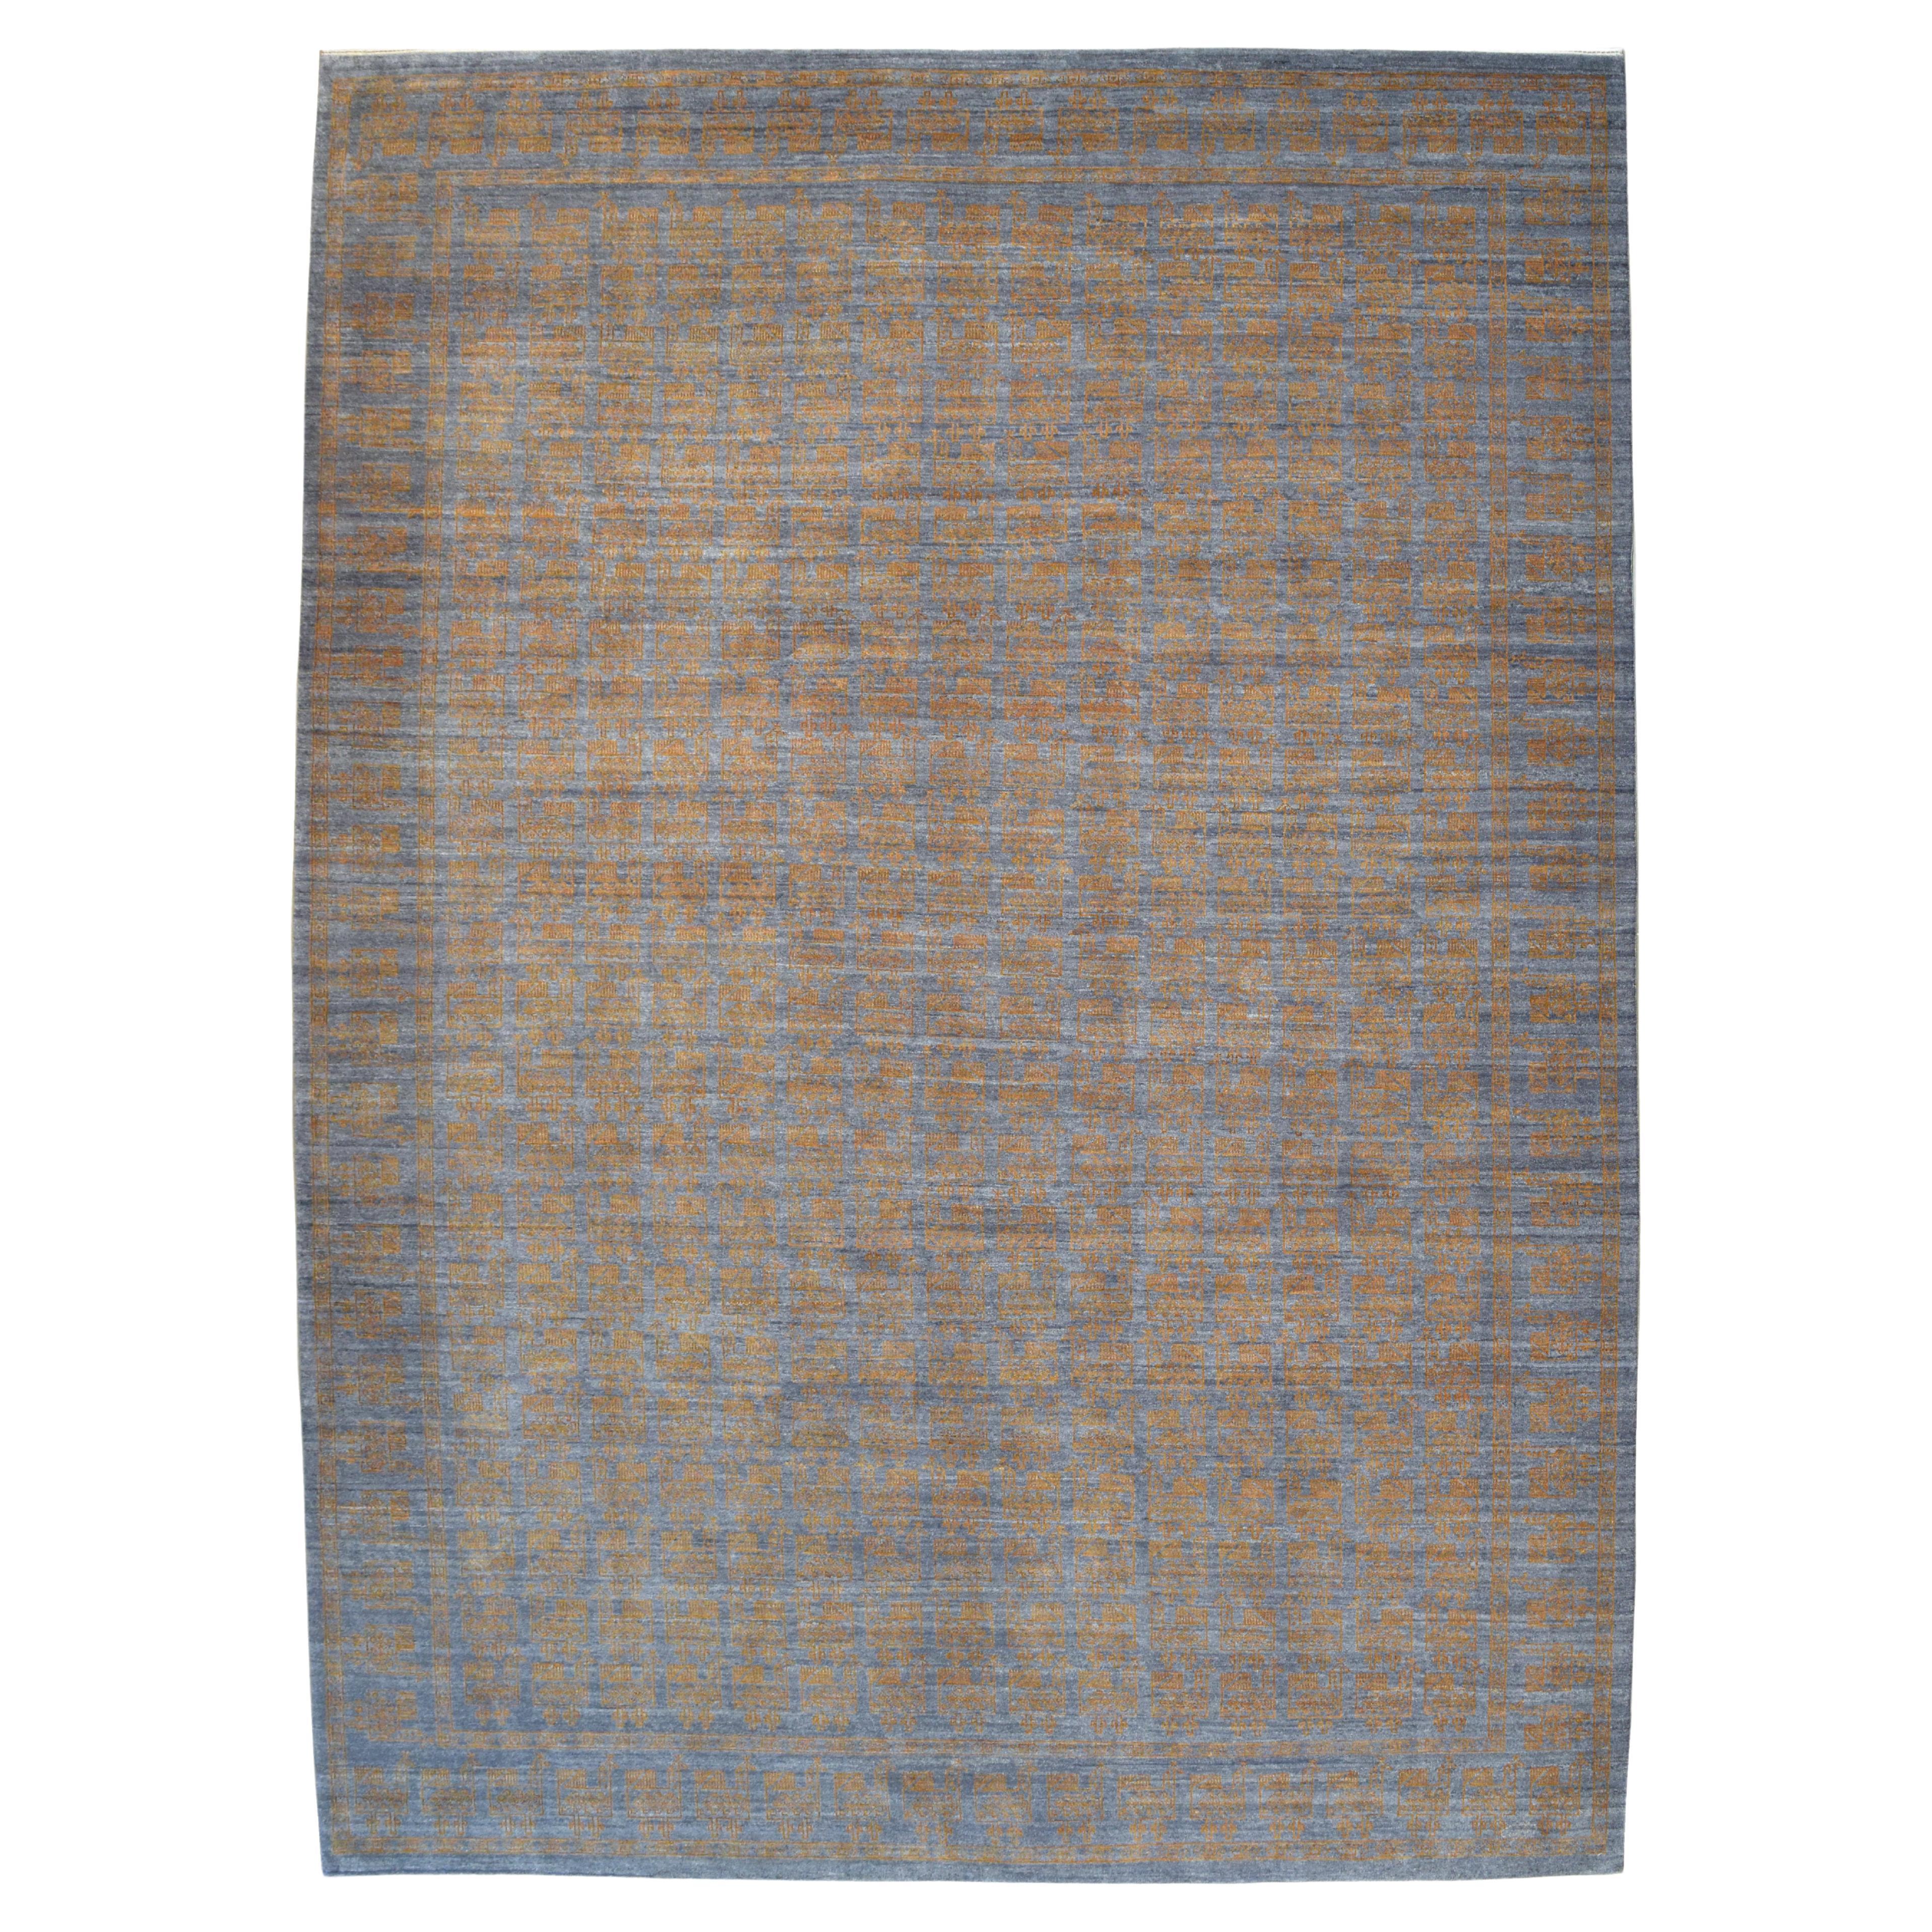 Orley Shabahang, Orange and Gray Contemporary Peacock Carpet, Wool, 9' x 12' For Sale